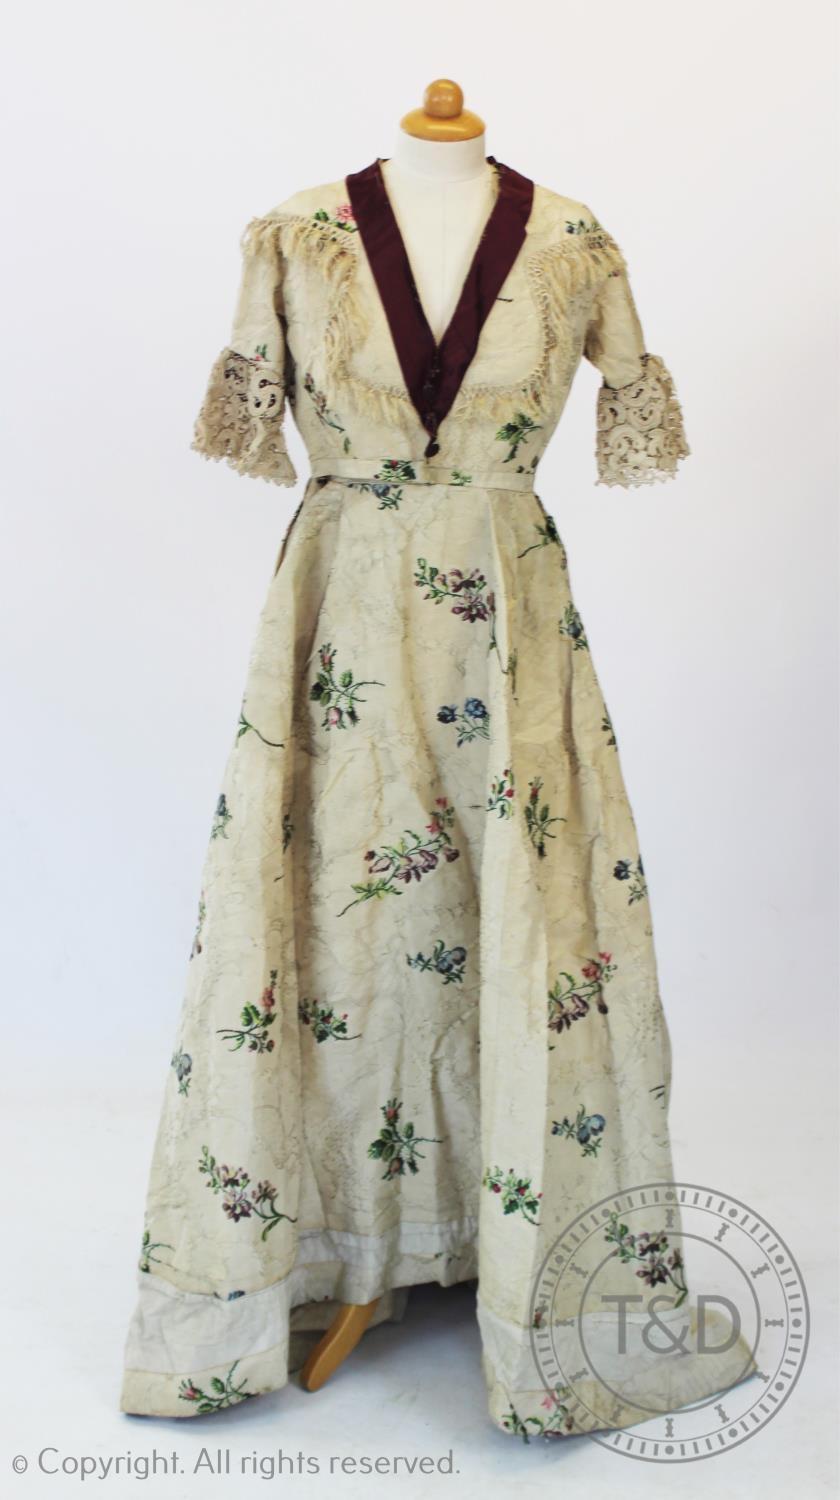 A Spitalfield silk dress, circa 1760's, the ivory silk with woven rococo design with sprays of